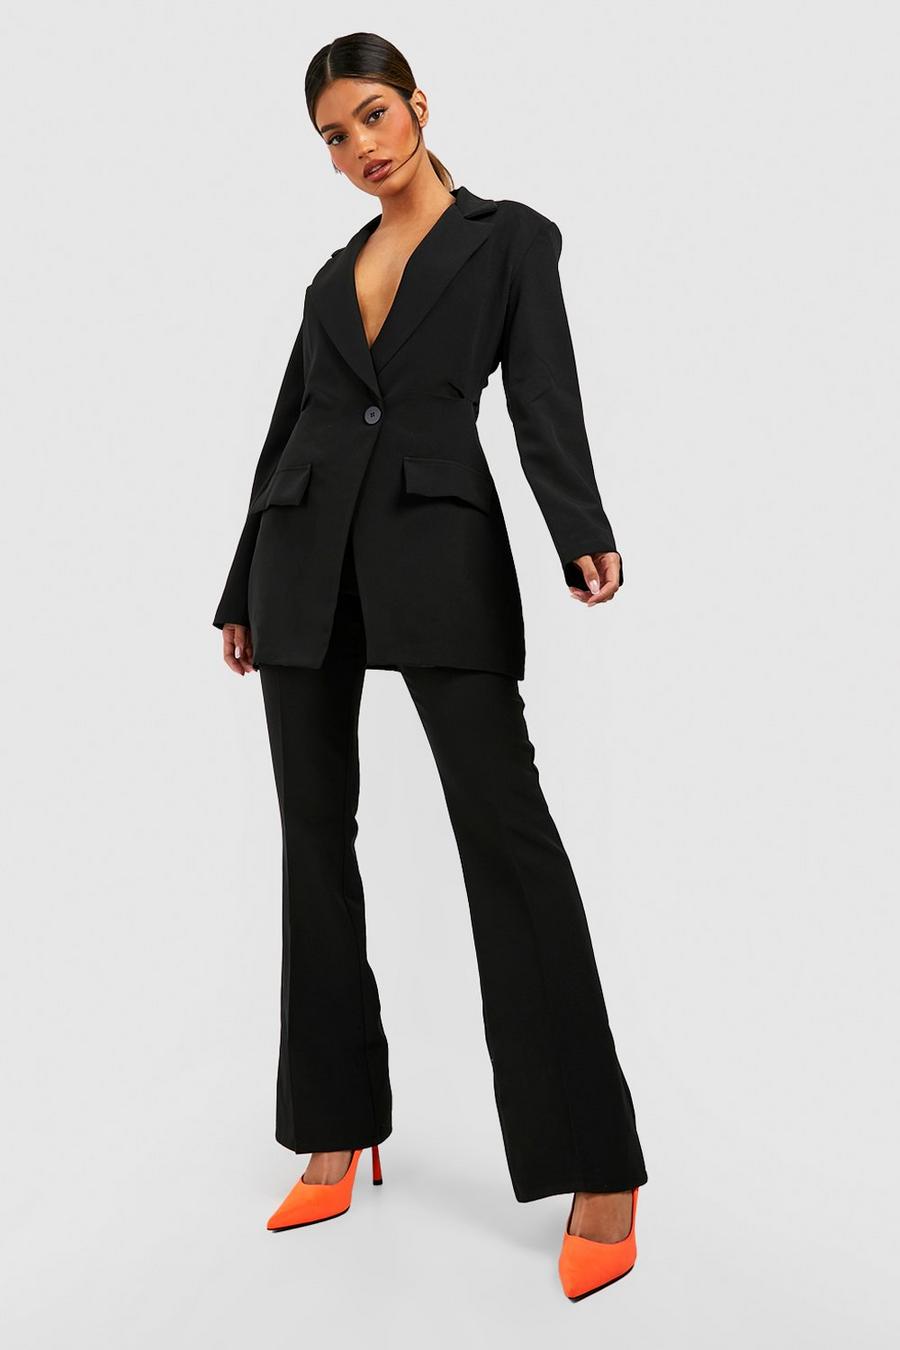 Black Fit & Flare Seam Front Tailored Pants image number 1